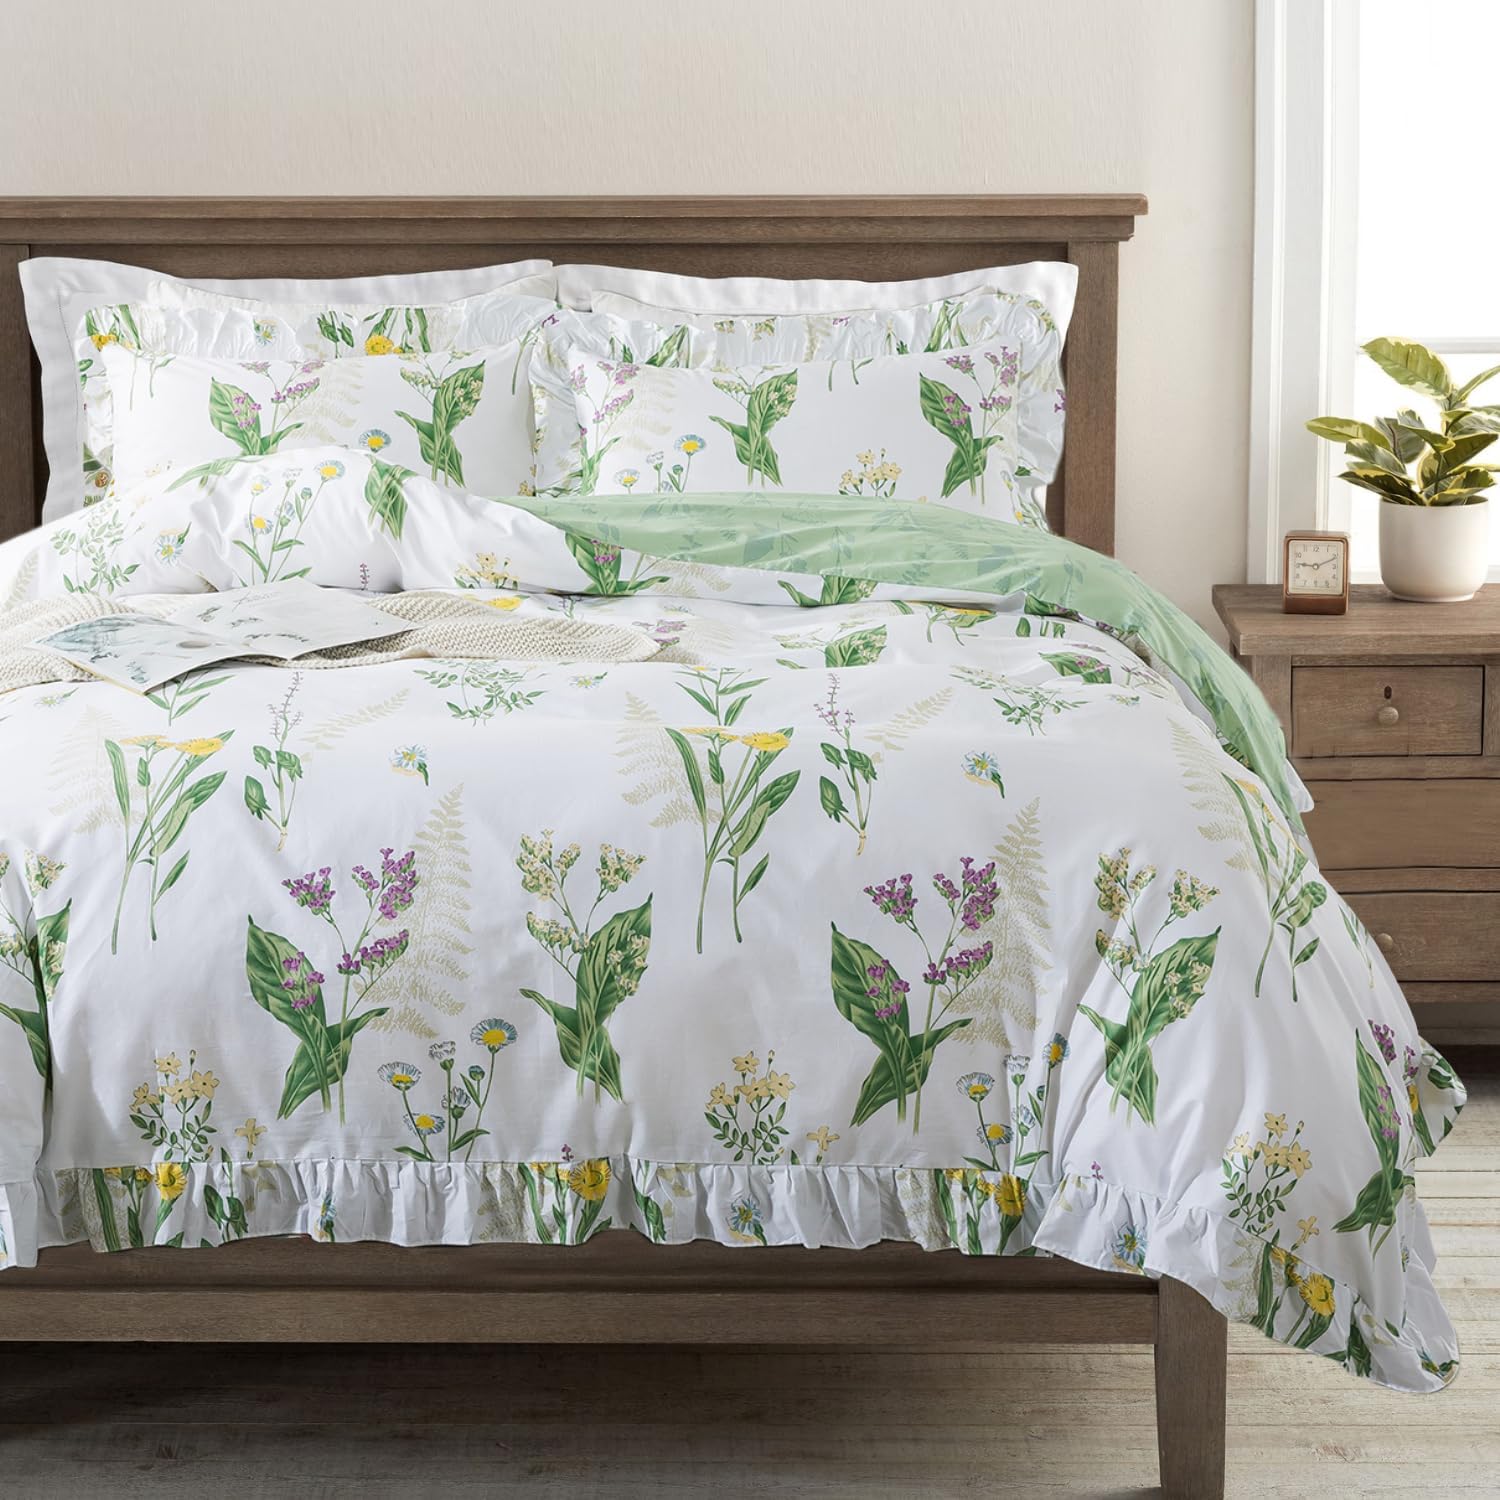 FADFAY Floral Duvet Cover Set Queen Size 100% Cotton Green Botanical Comforter Cover Lavender Daisy Flower Leaf Pattern French Country Bedding Soft Breathable Ruffle Bed Covers 3 Pcs, Queen